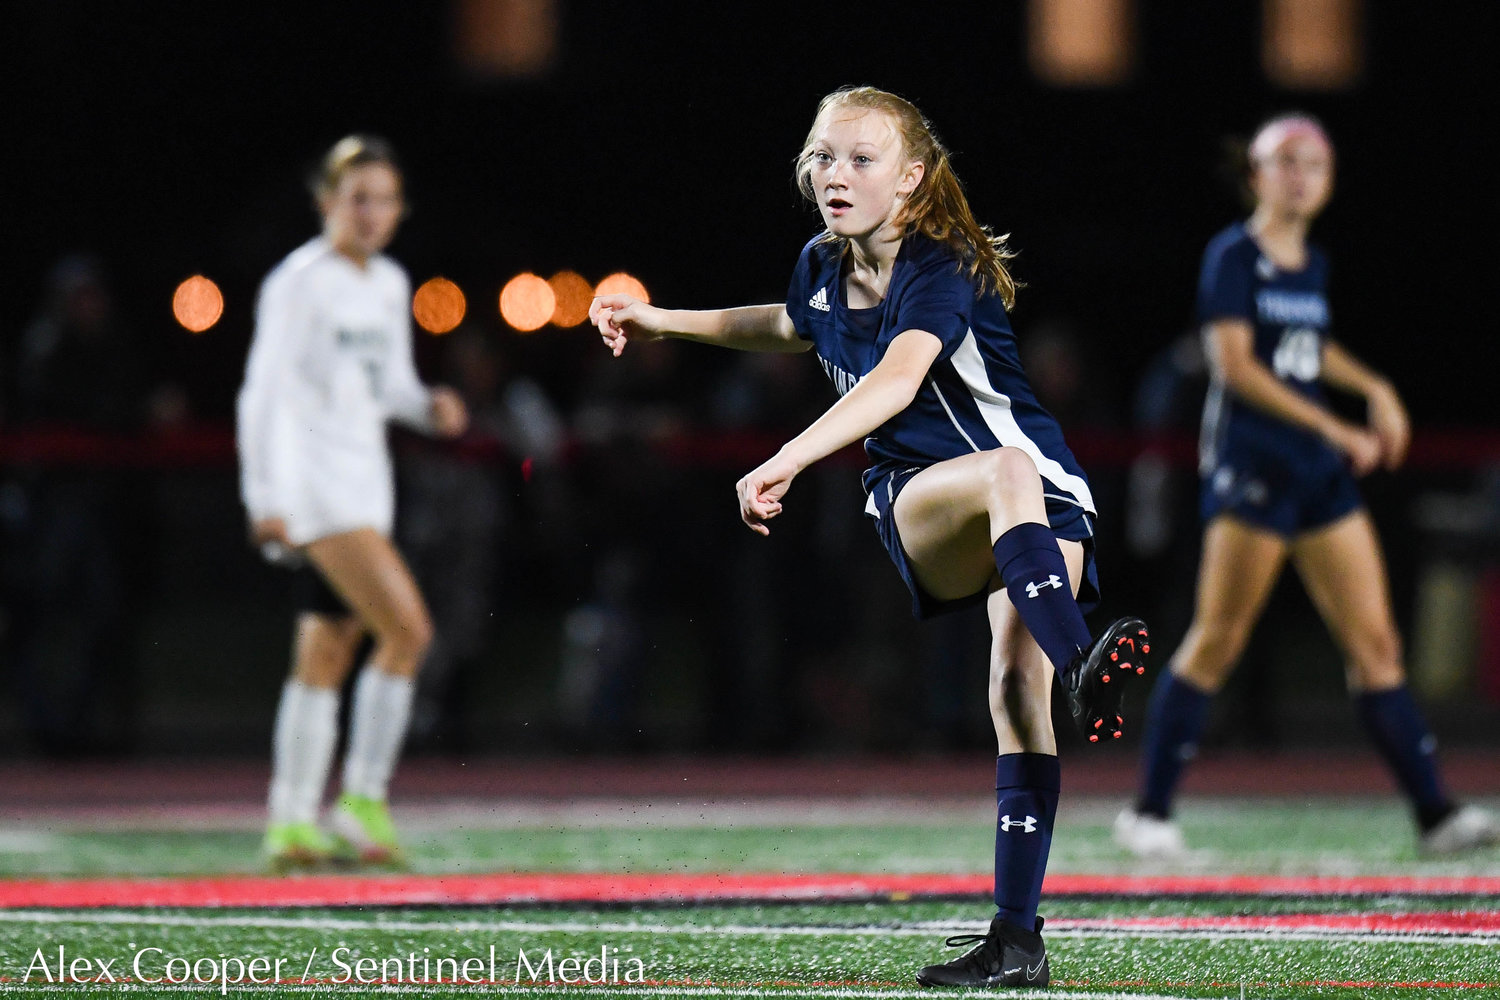 Central Valley Academy player Jenna Johnson clears the ball during the Class B girls soccer semifinals game against Marcellus on Wednesday, Oct. 26 at Chittenango High School. CVA won 2-0.